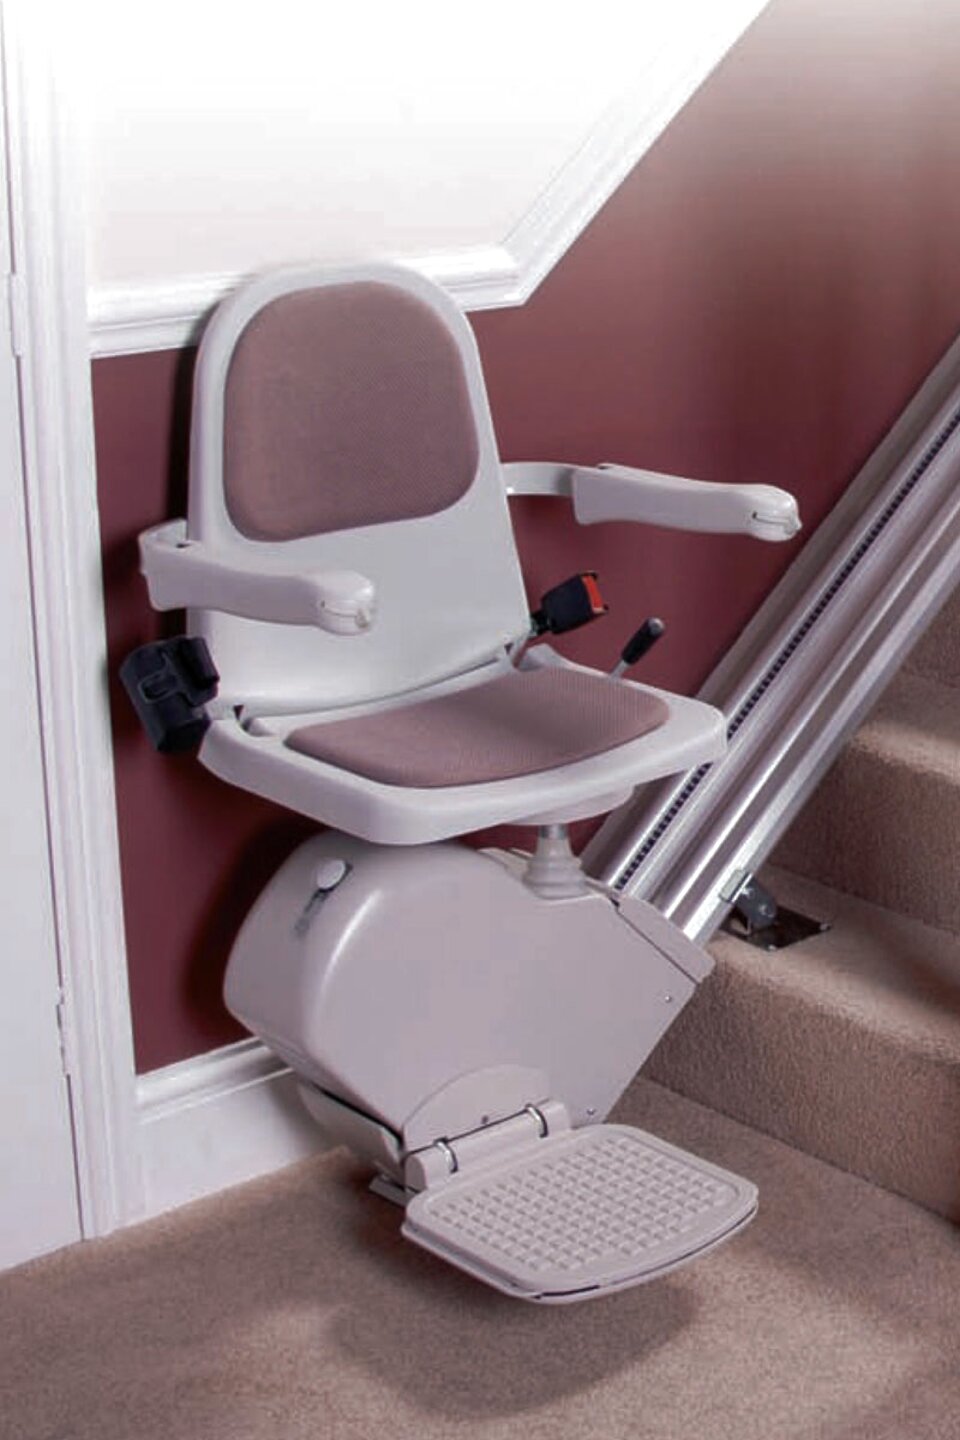 acorn stairlifts cost